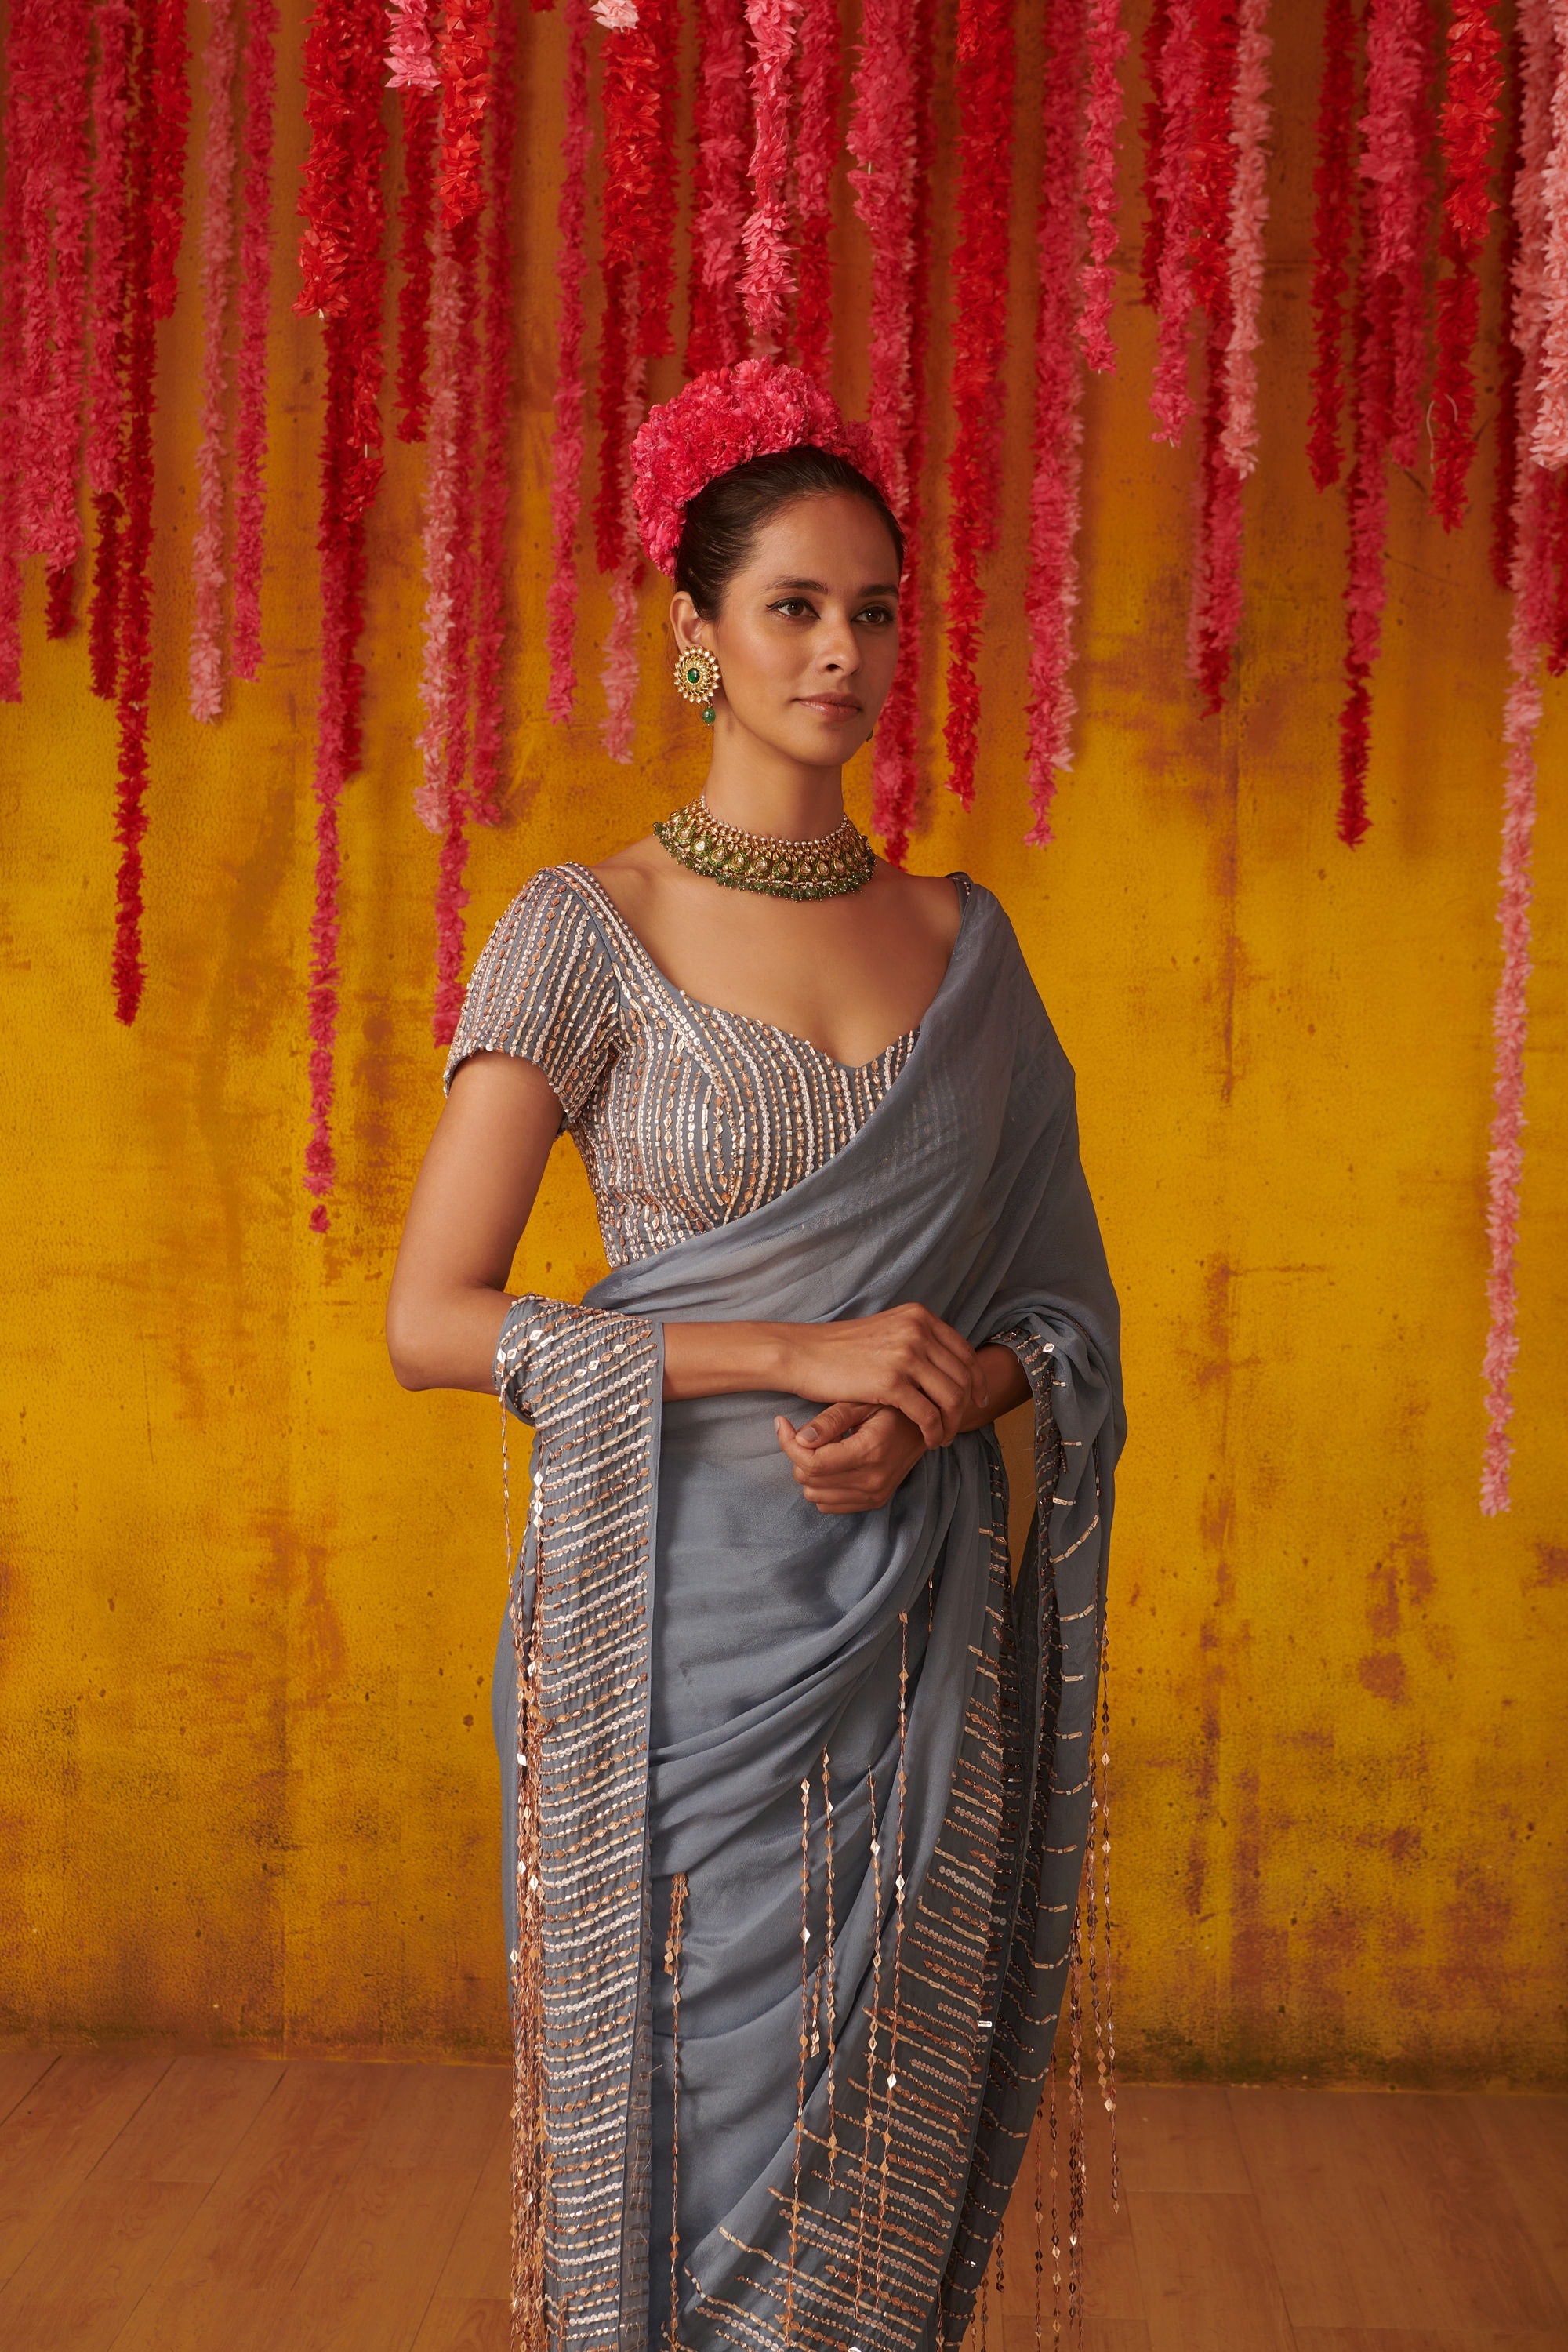 Periwinkle Blue Embroidered Draped Saree Set